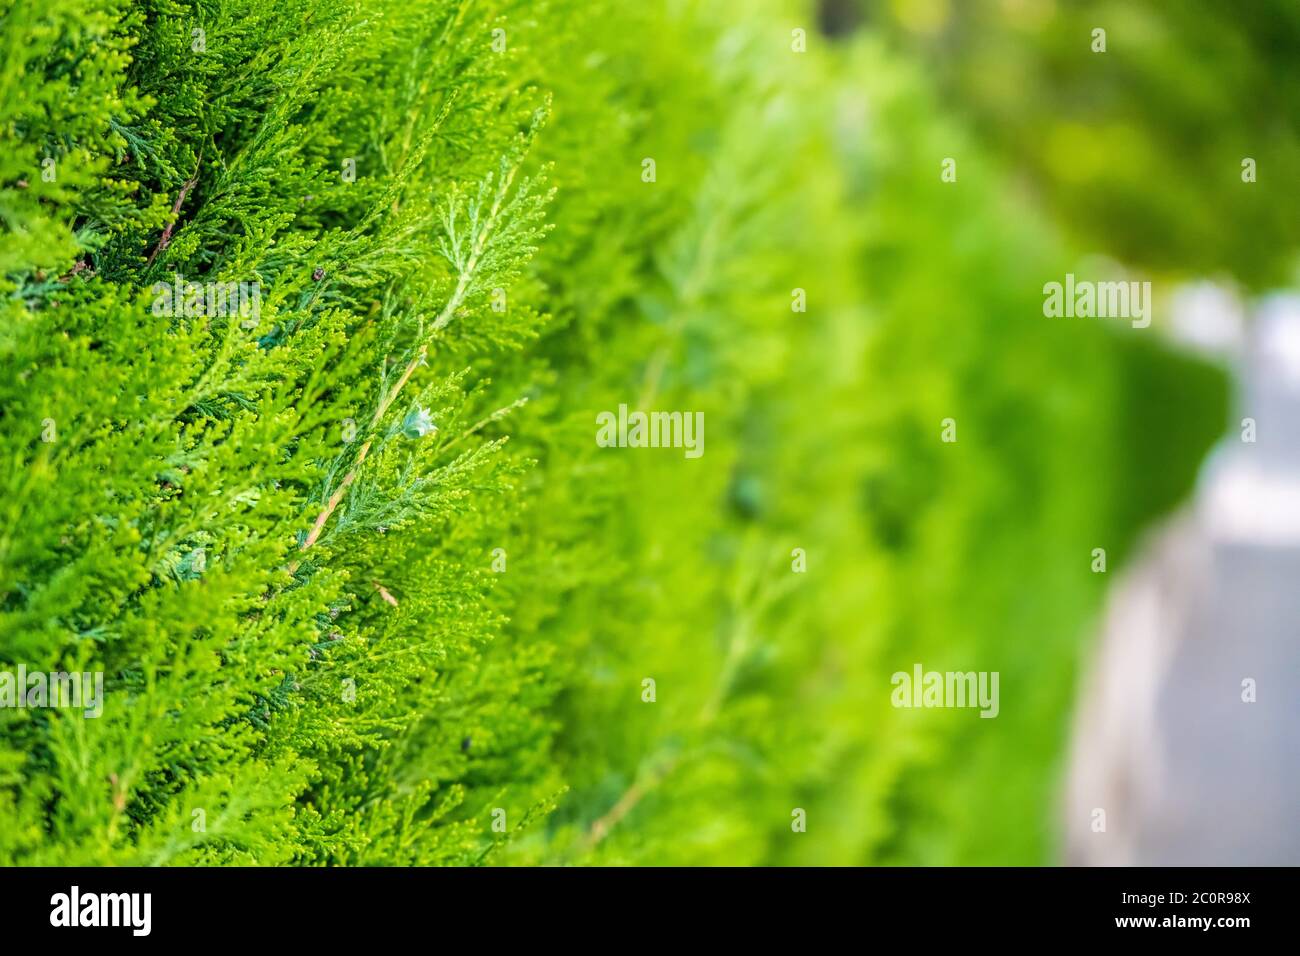 Green hedge of thuja trees. Green hedge of the tui tree. Nature, background. The wall consists of a green hedge. Stock Photo